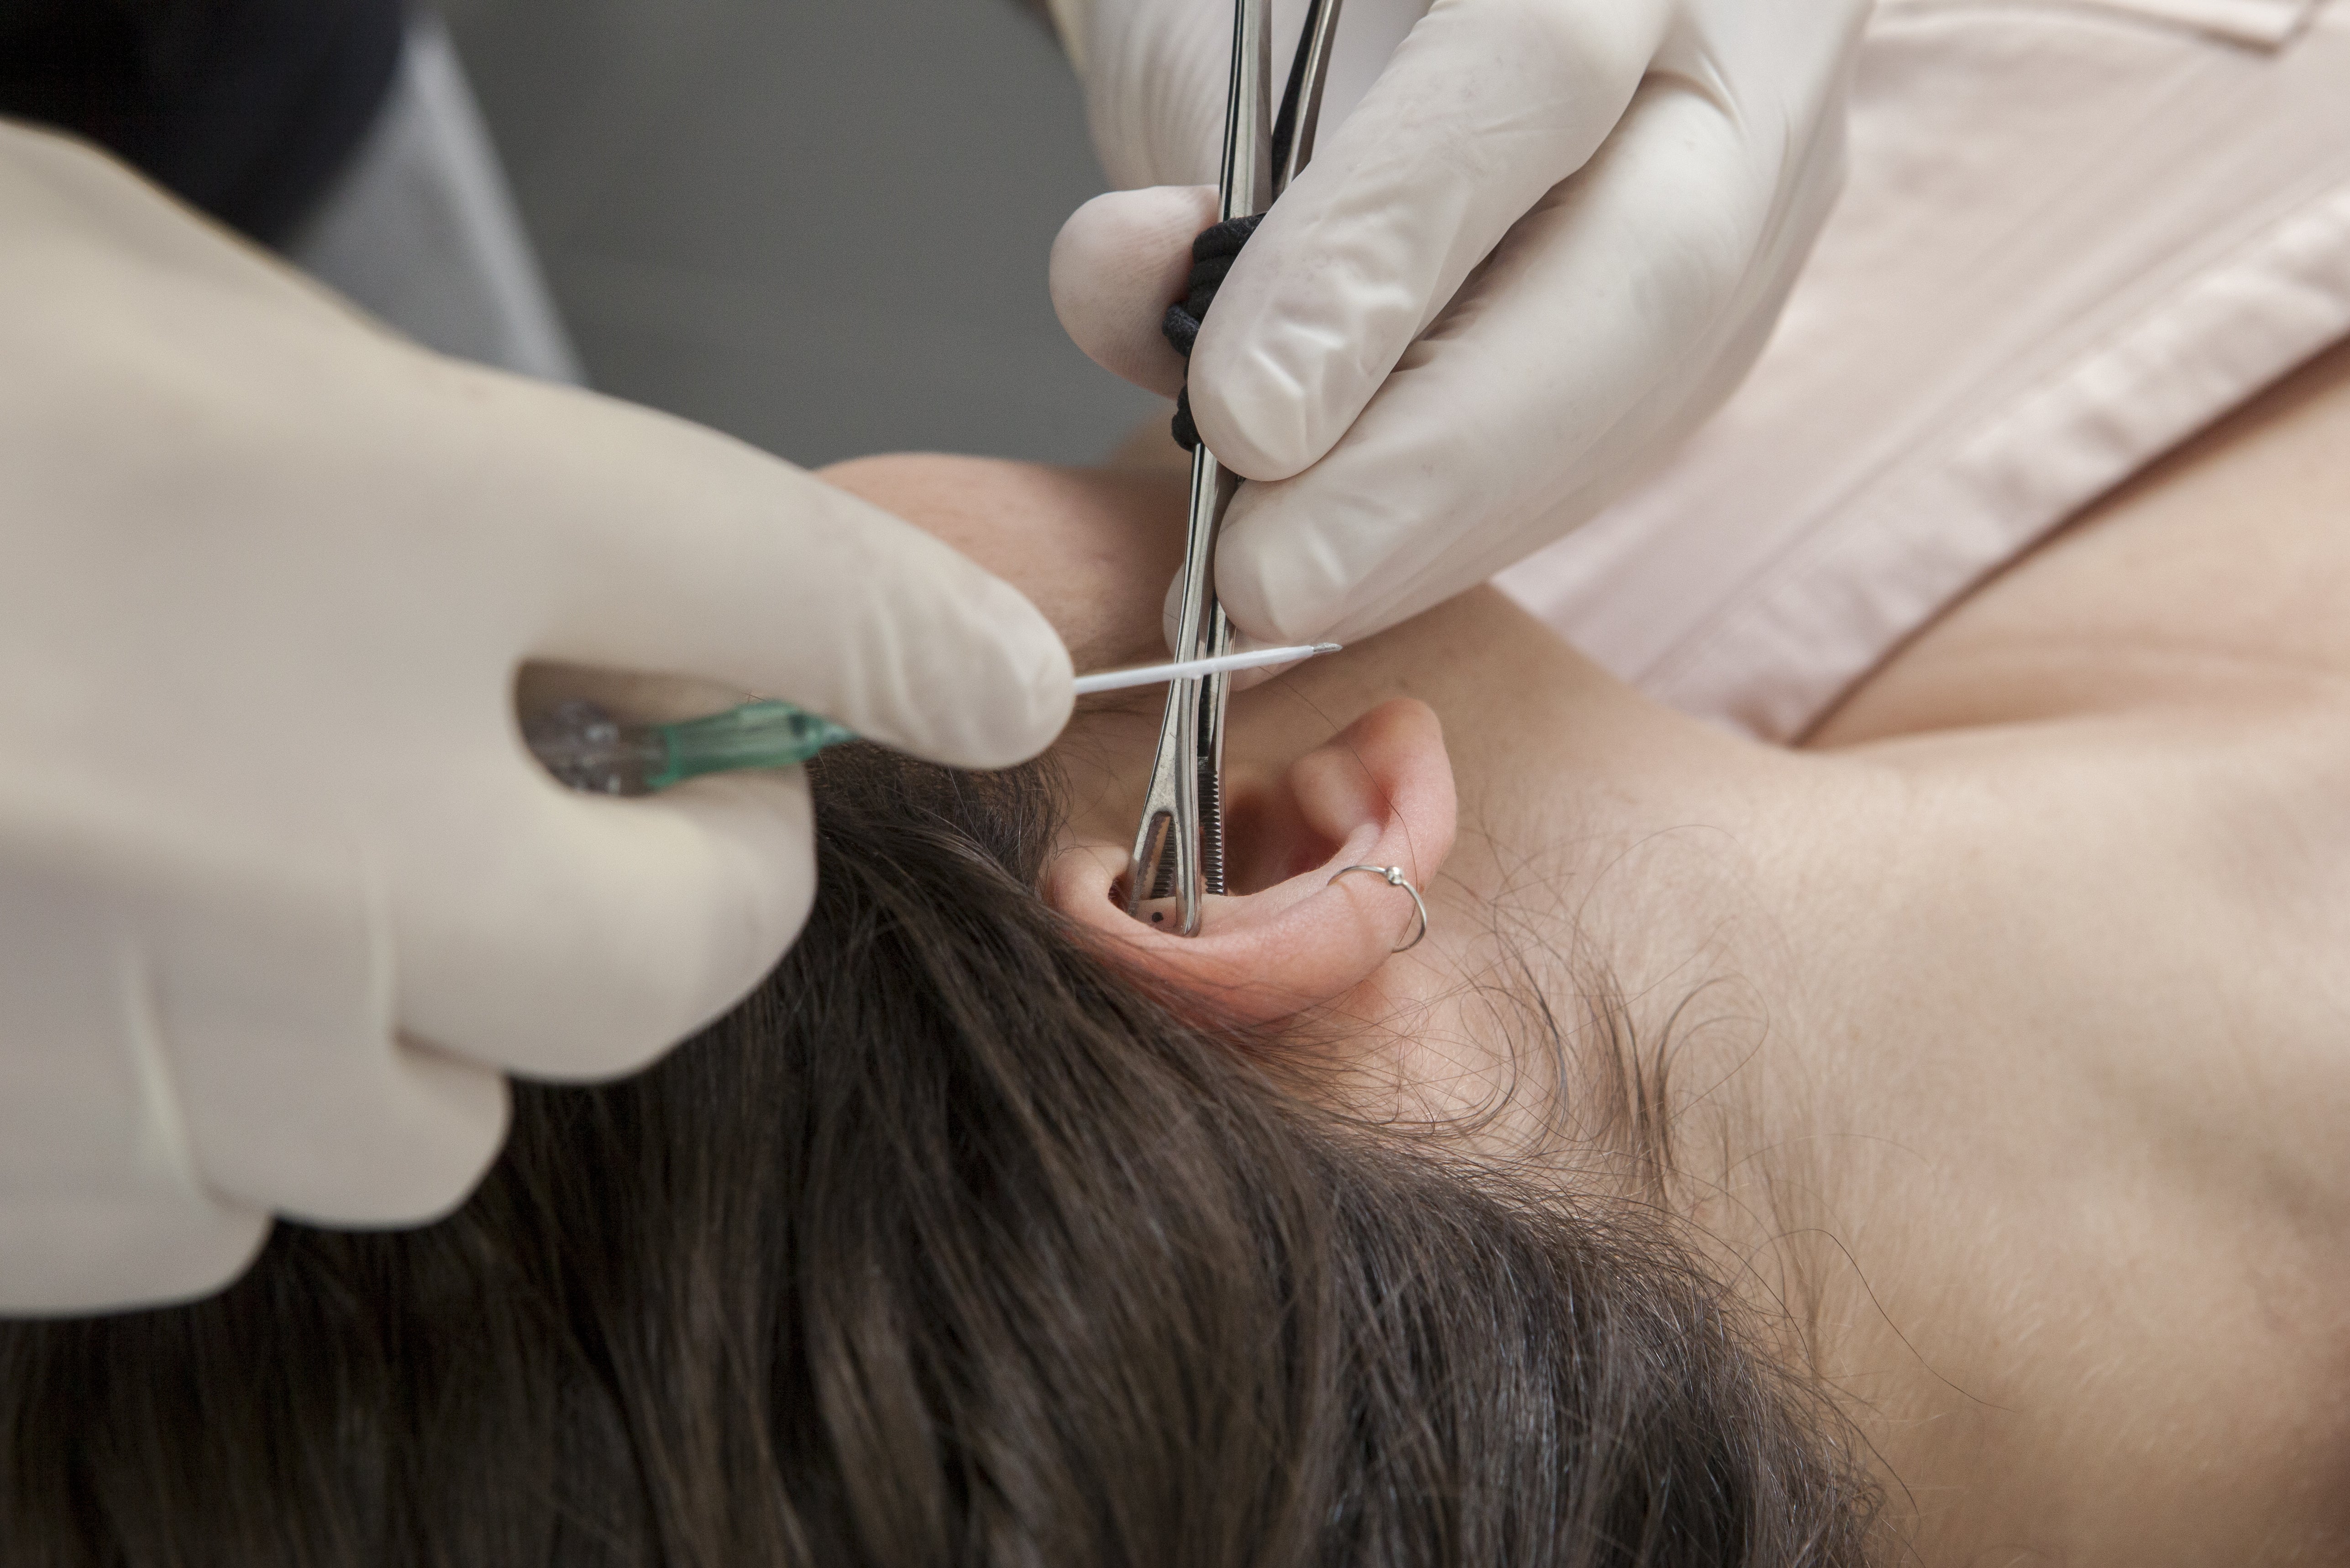 The rook piercing procedure showing a females ear in clamps with a pair of gloved hands holding a needle waiting to be shoved through the cartilage.